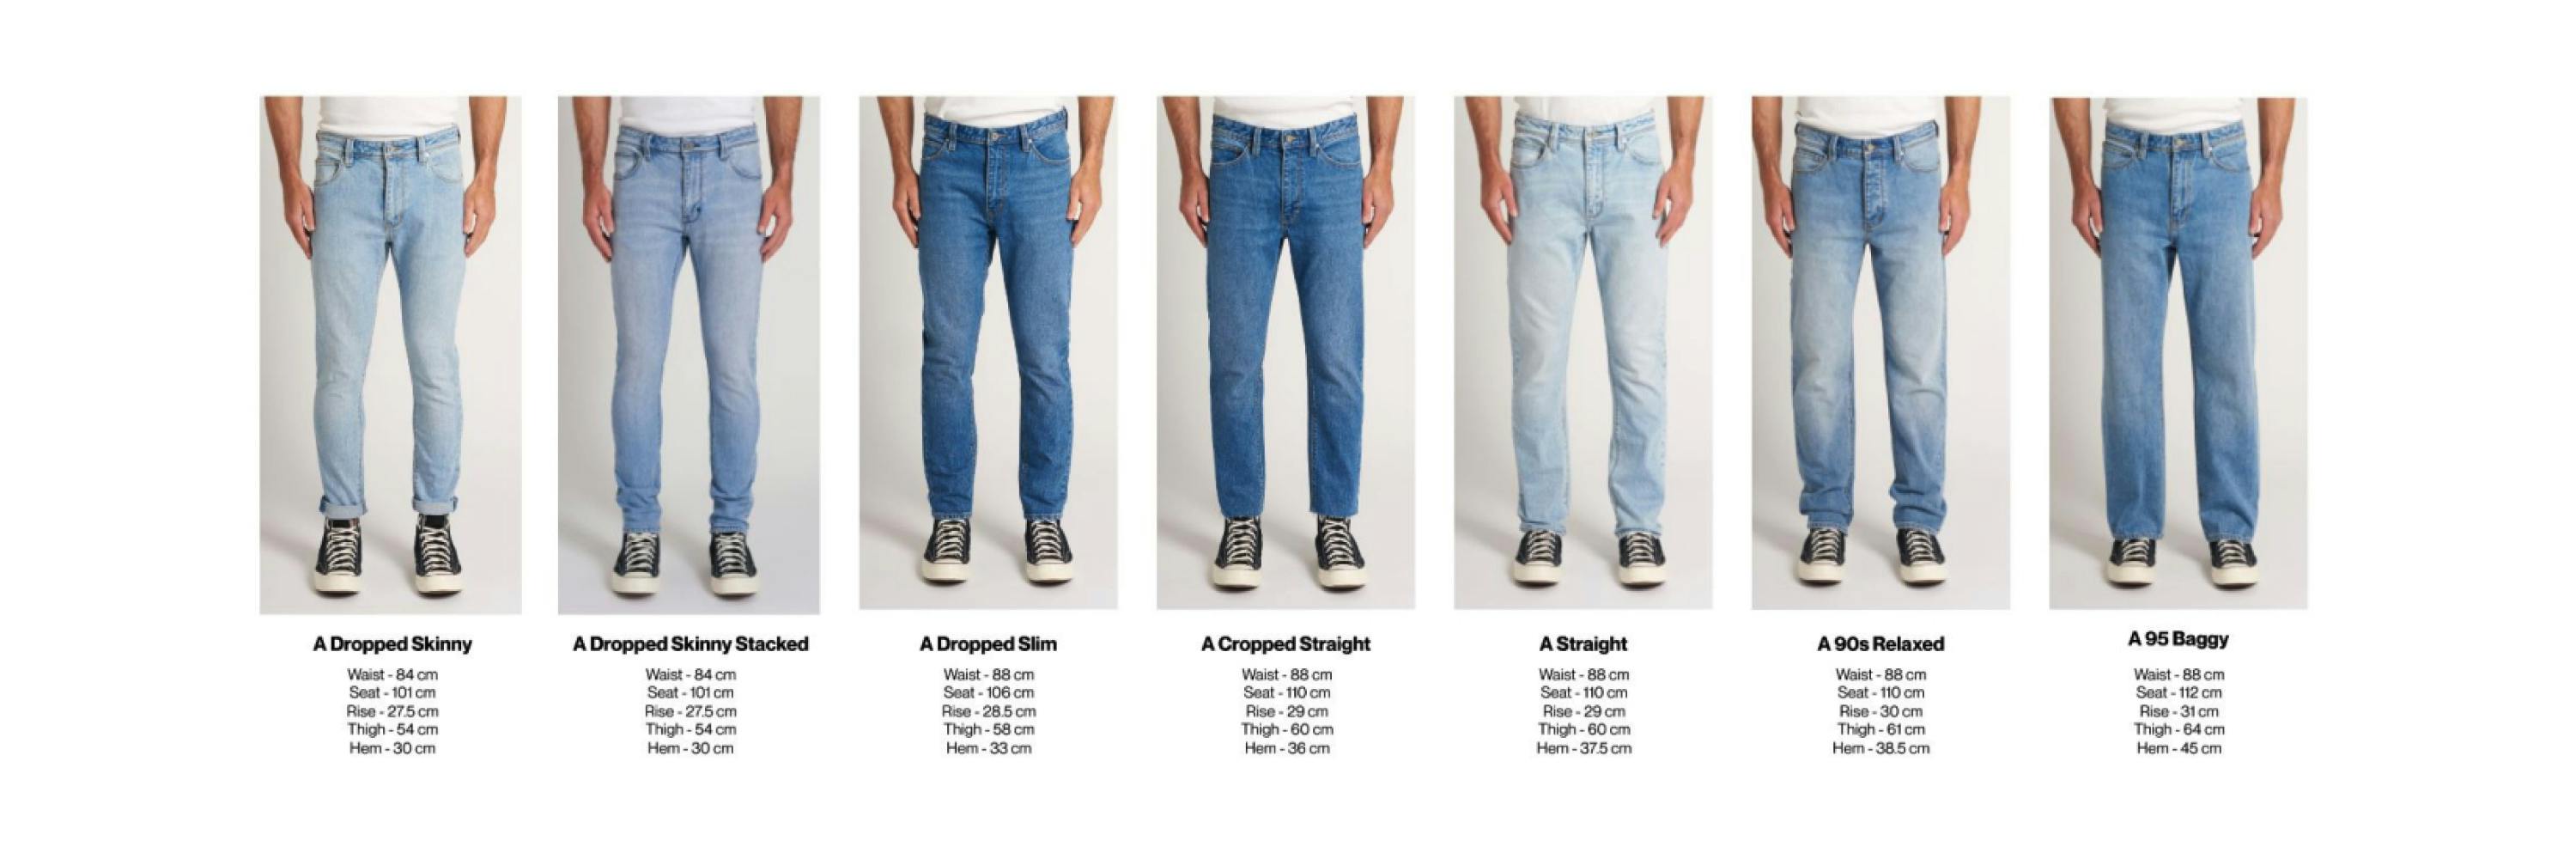 FIT GUIDE  ABRAND JEANS